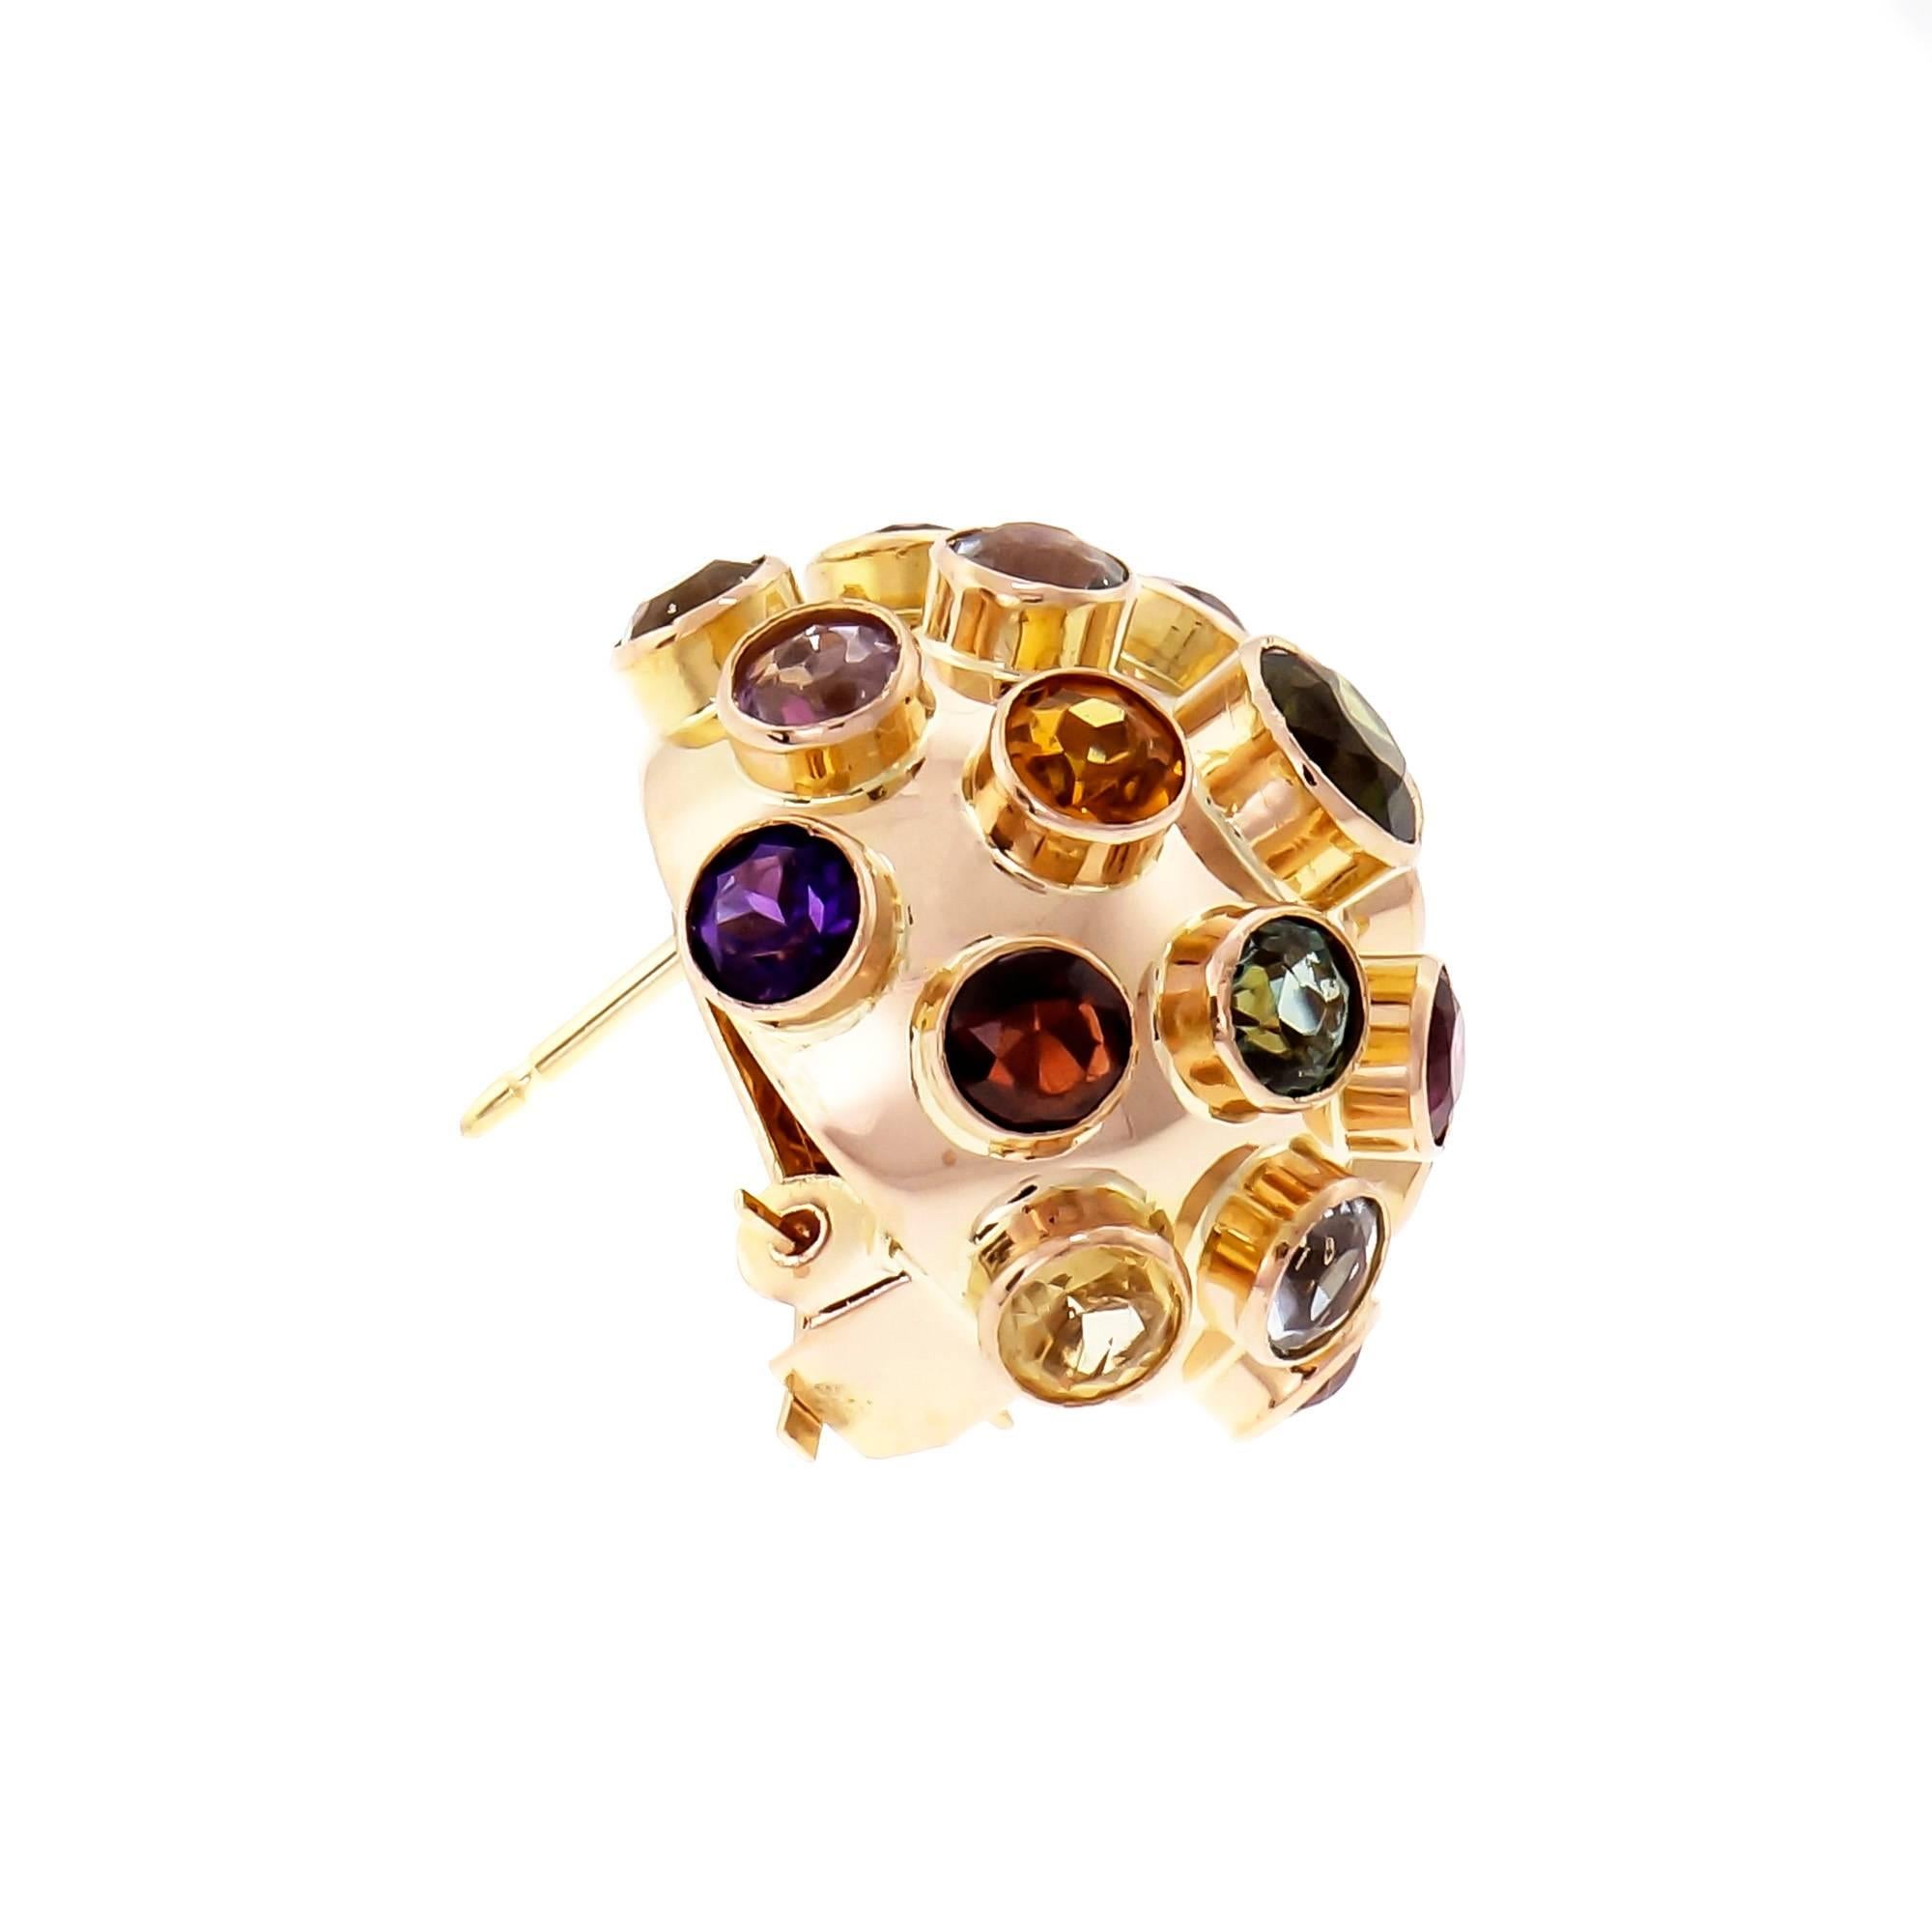 Vintage Sputnik style domed earrings in 14k yellow gold with clip and post set with 38 round natural untreated gemstones.

38 round multi-colored natural gemstones; Tourmaline, Aqua, Amethyst, Citrine and Garnet.
14k yellow gold 
8.3 grams 
Tested: